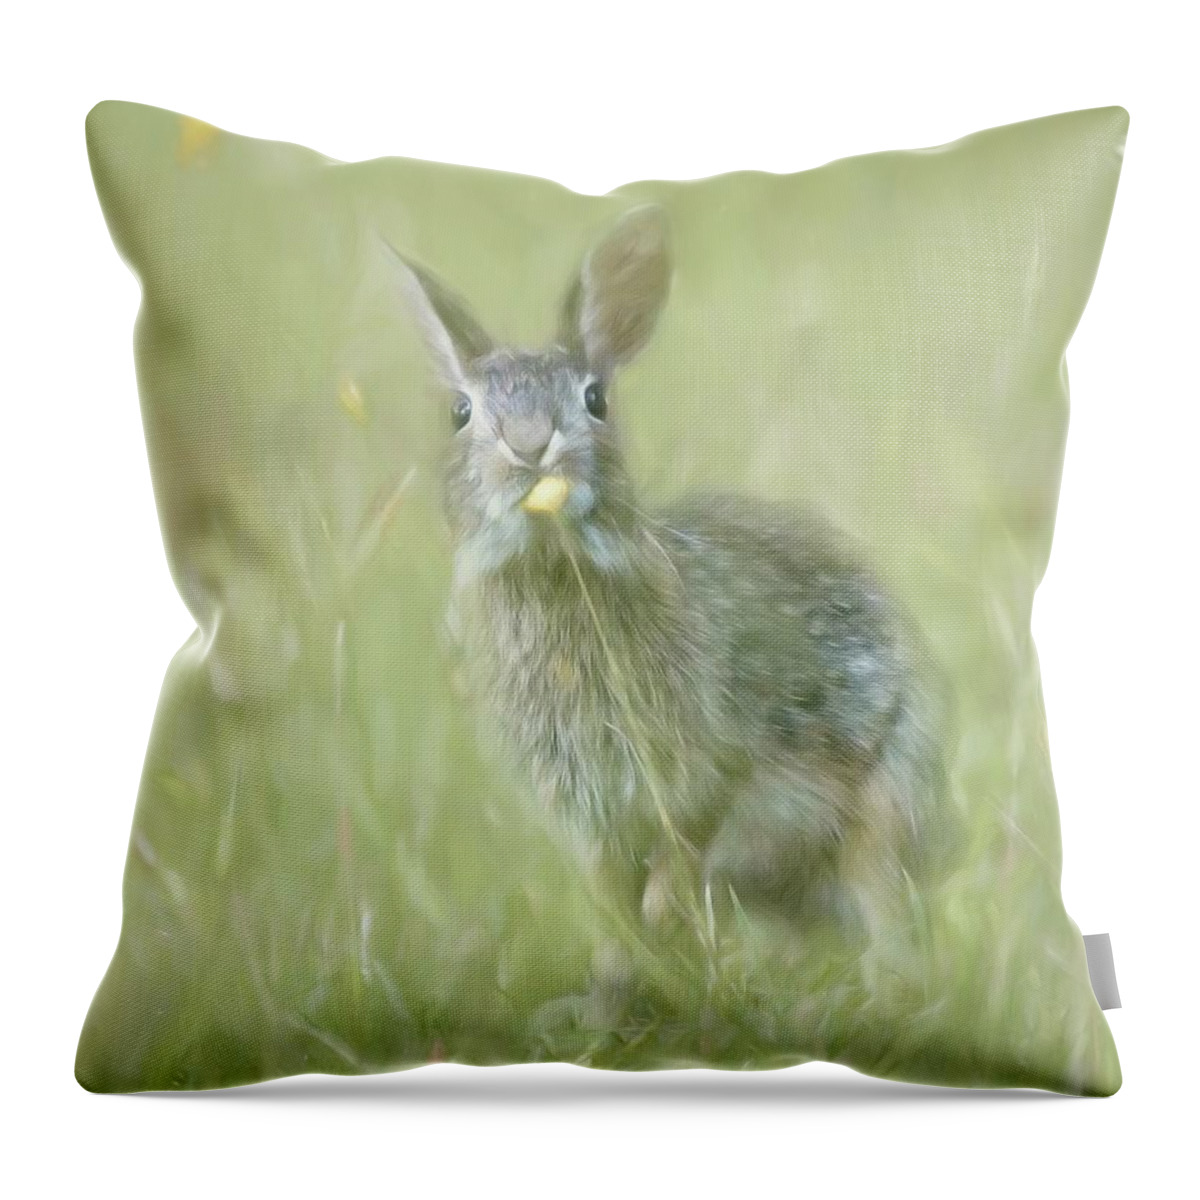 Bunny Throw Pillow featuring the photograph Bunny and Dandelion by Marjorie Whitley